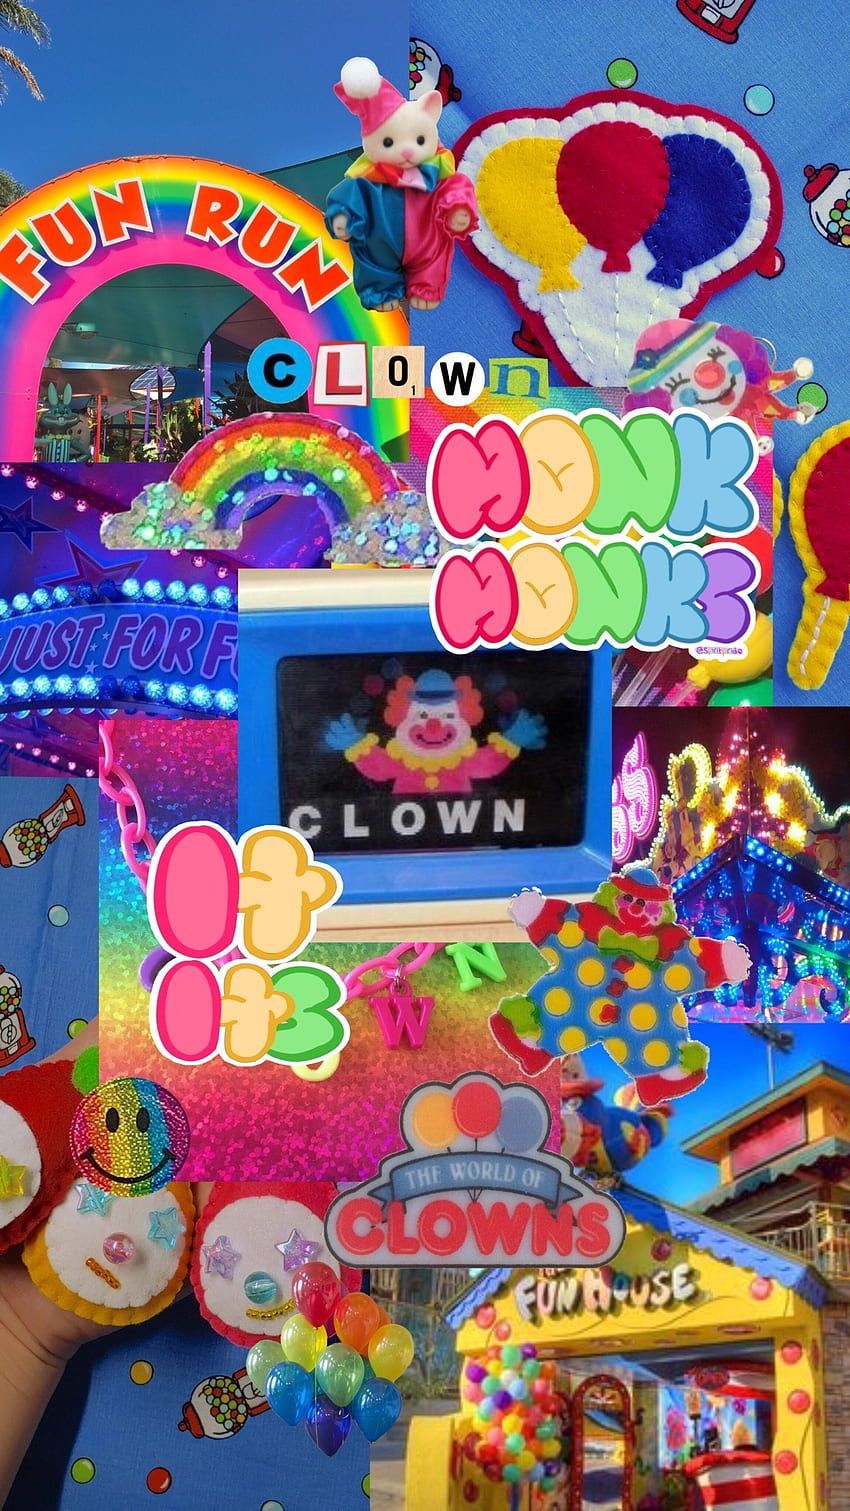 A picture of an arcade game with many different colors - Clown, clowncore